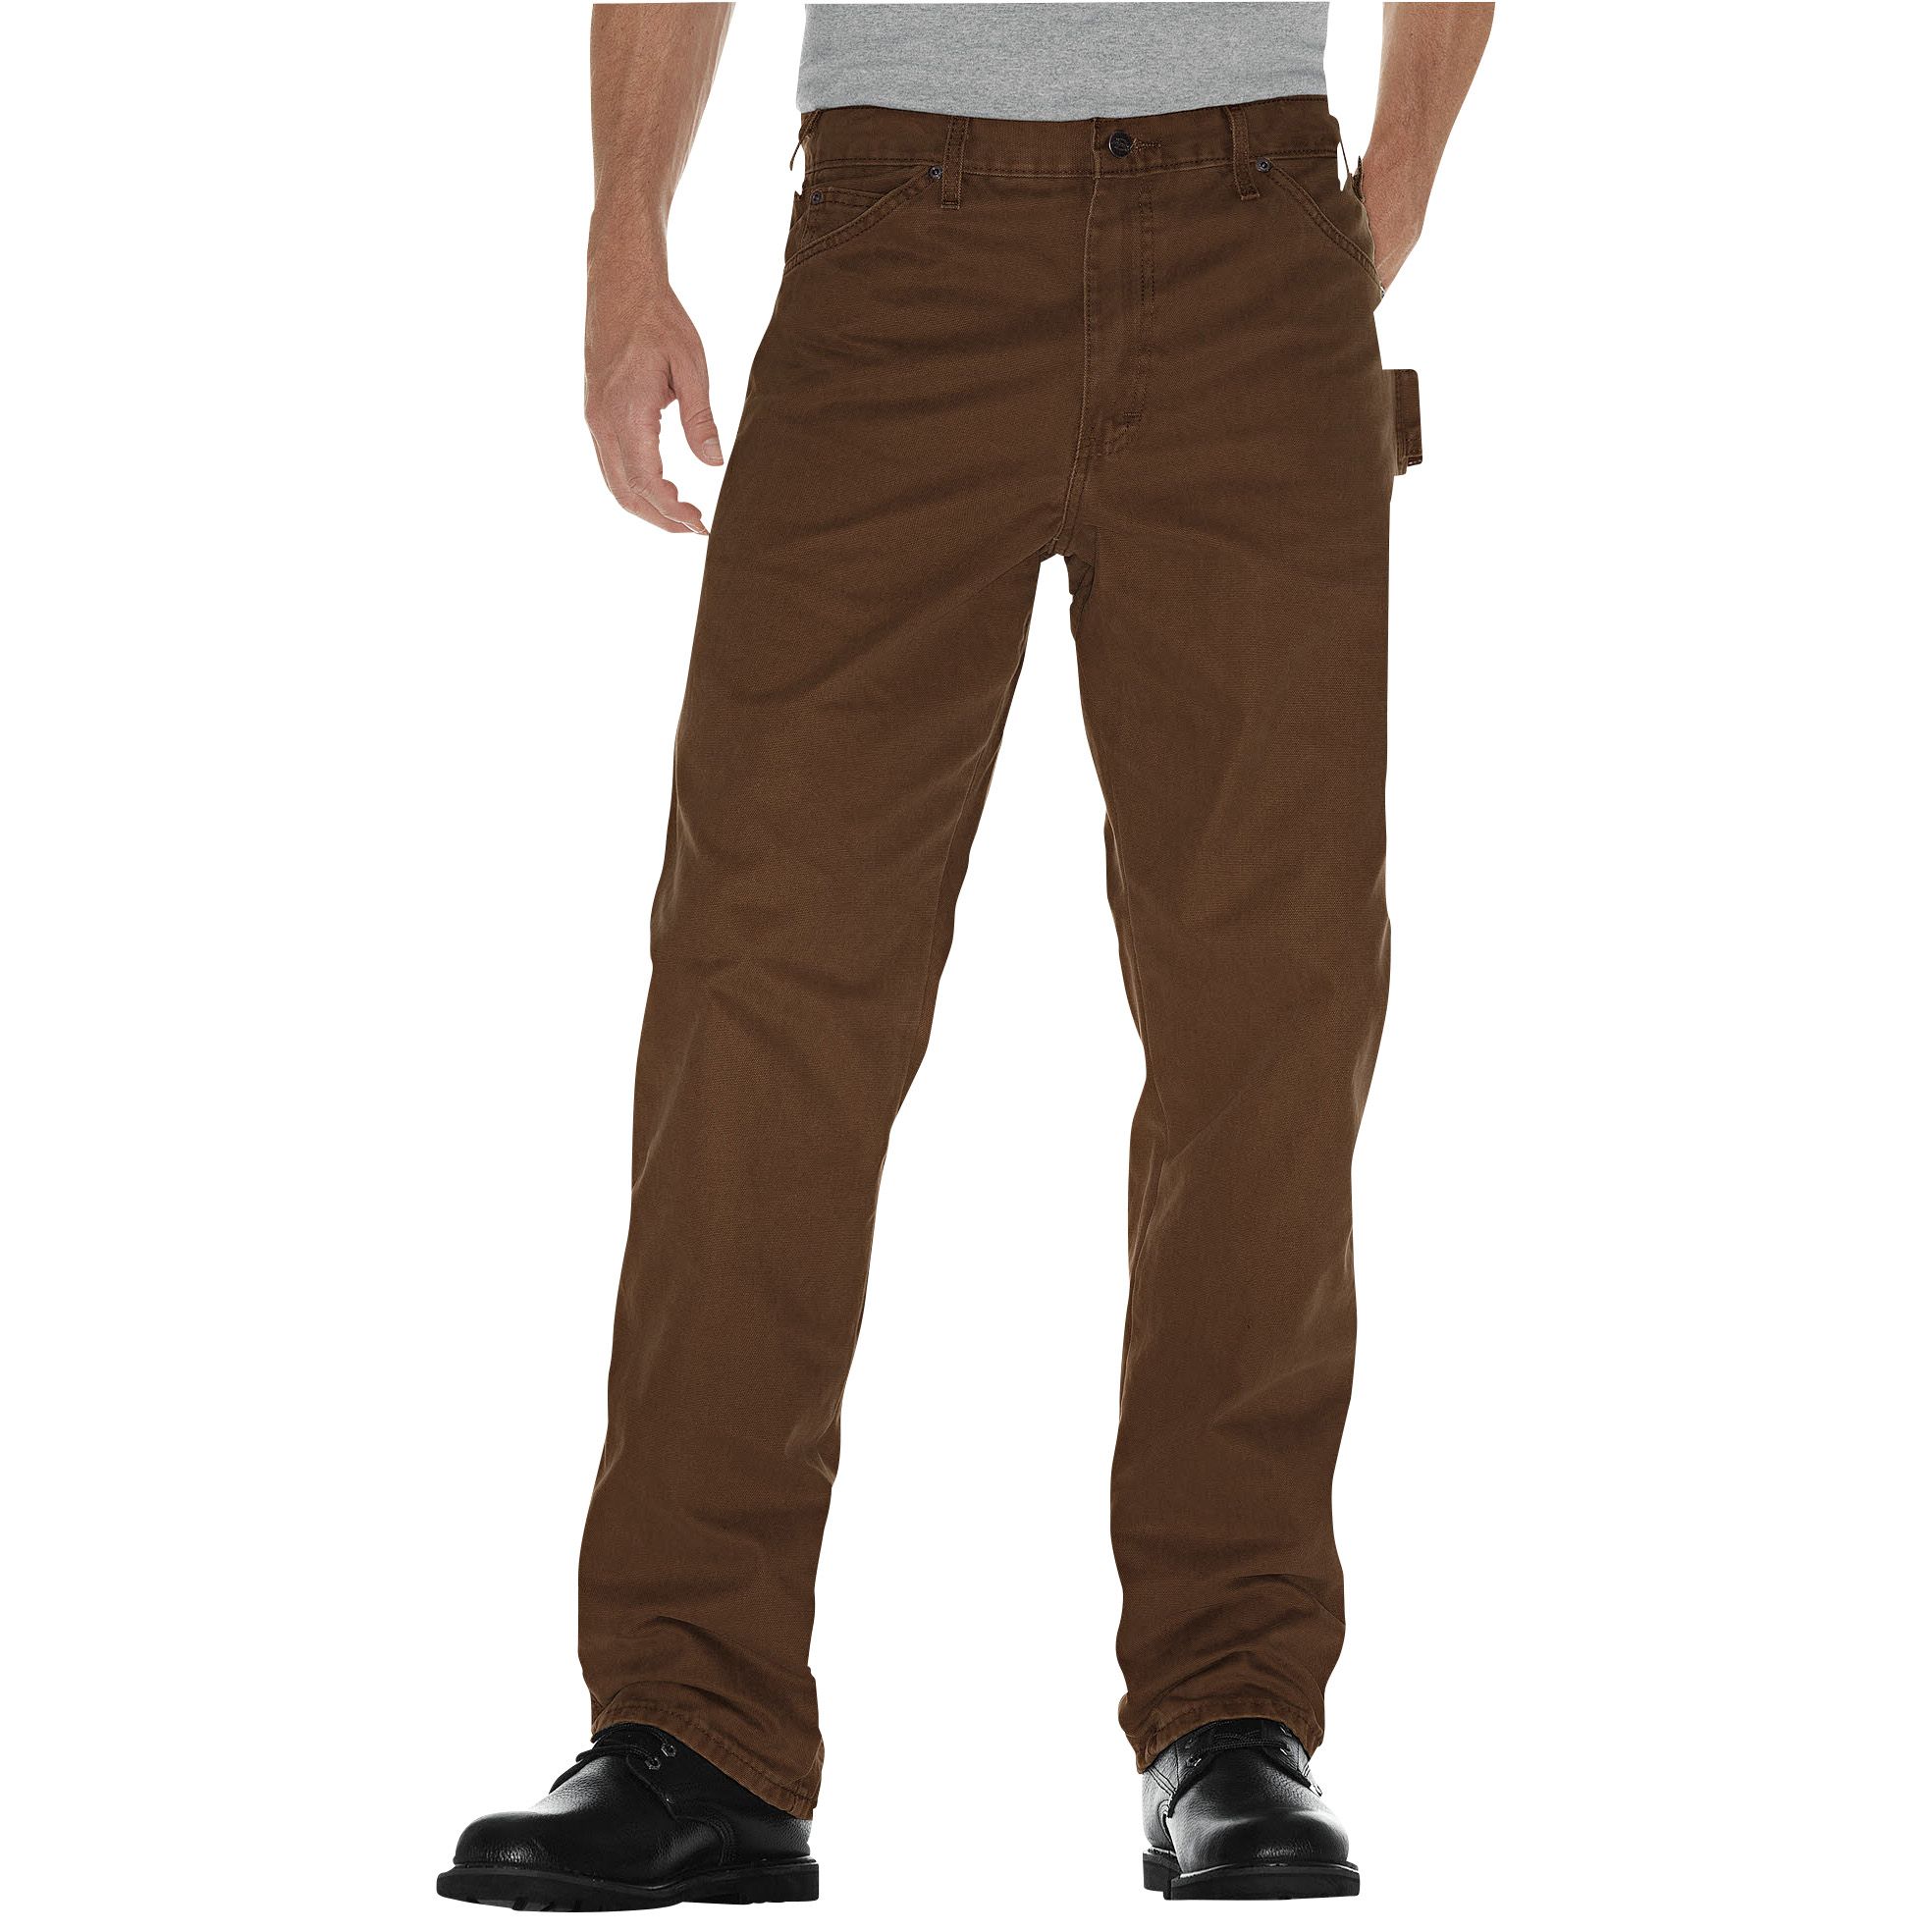 Dickies Men's Relaxed Fit Sanded Duck Carpenter Jeans - Rinsed